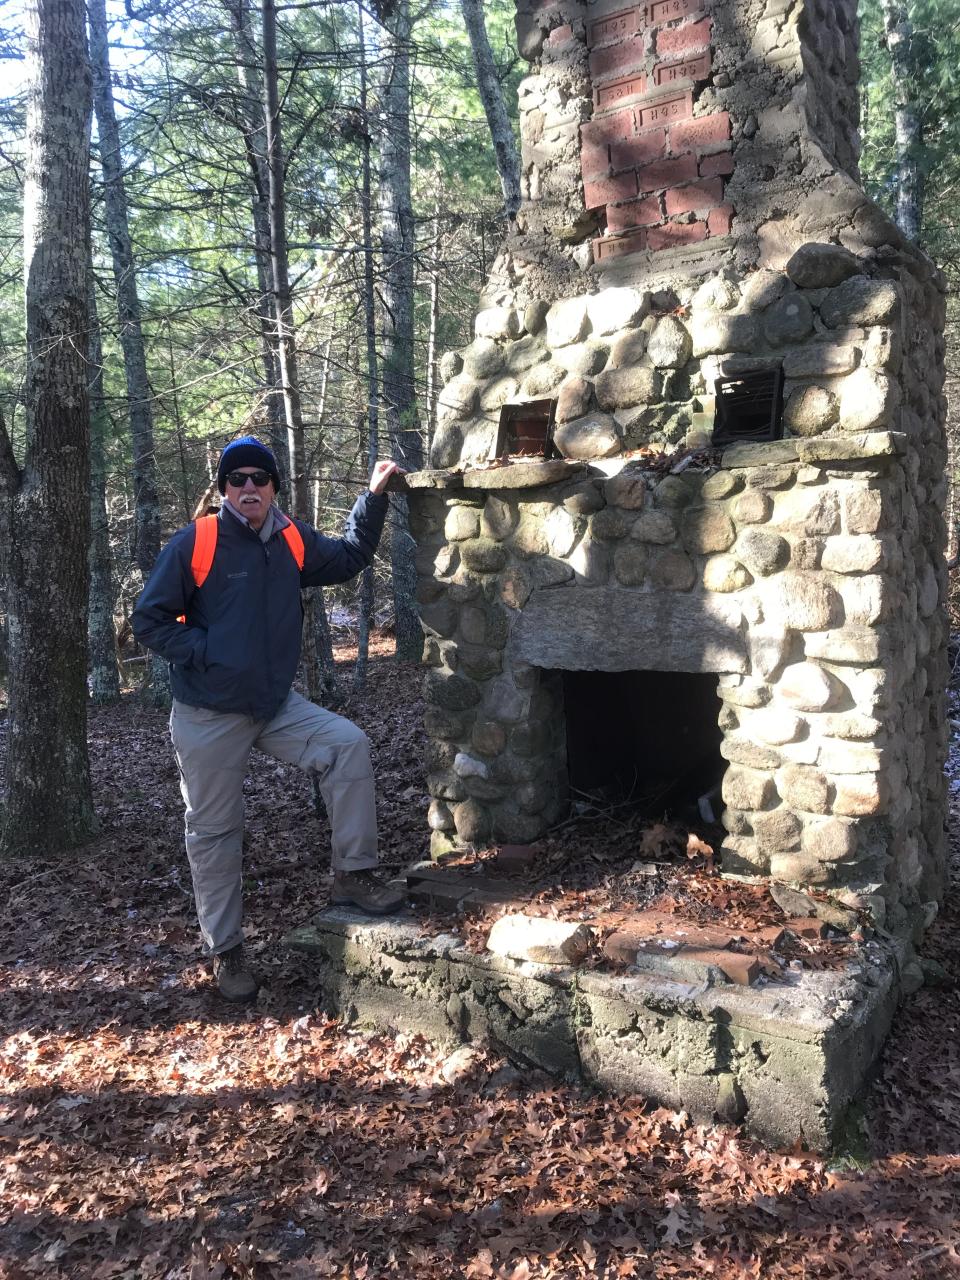 John Kostrzewa, at the decaying stone chimney on the banks of Carr Pond in the Maxwell Mays Wildlife Refuge.